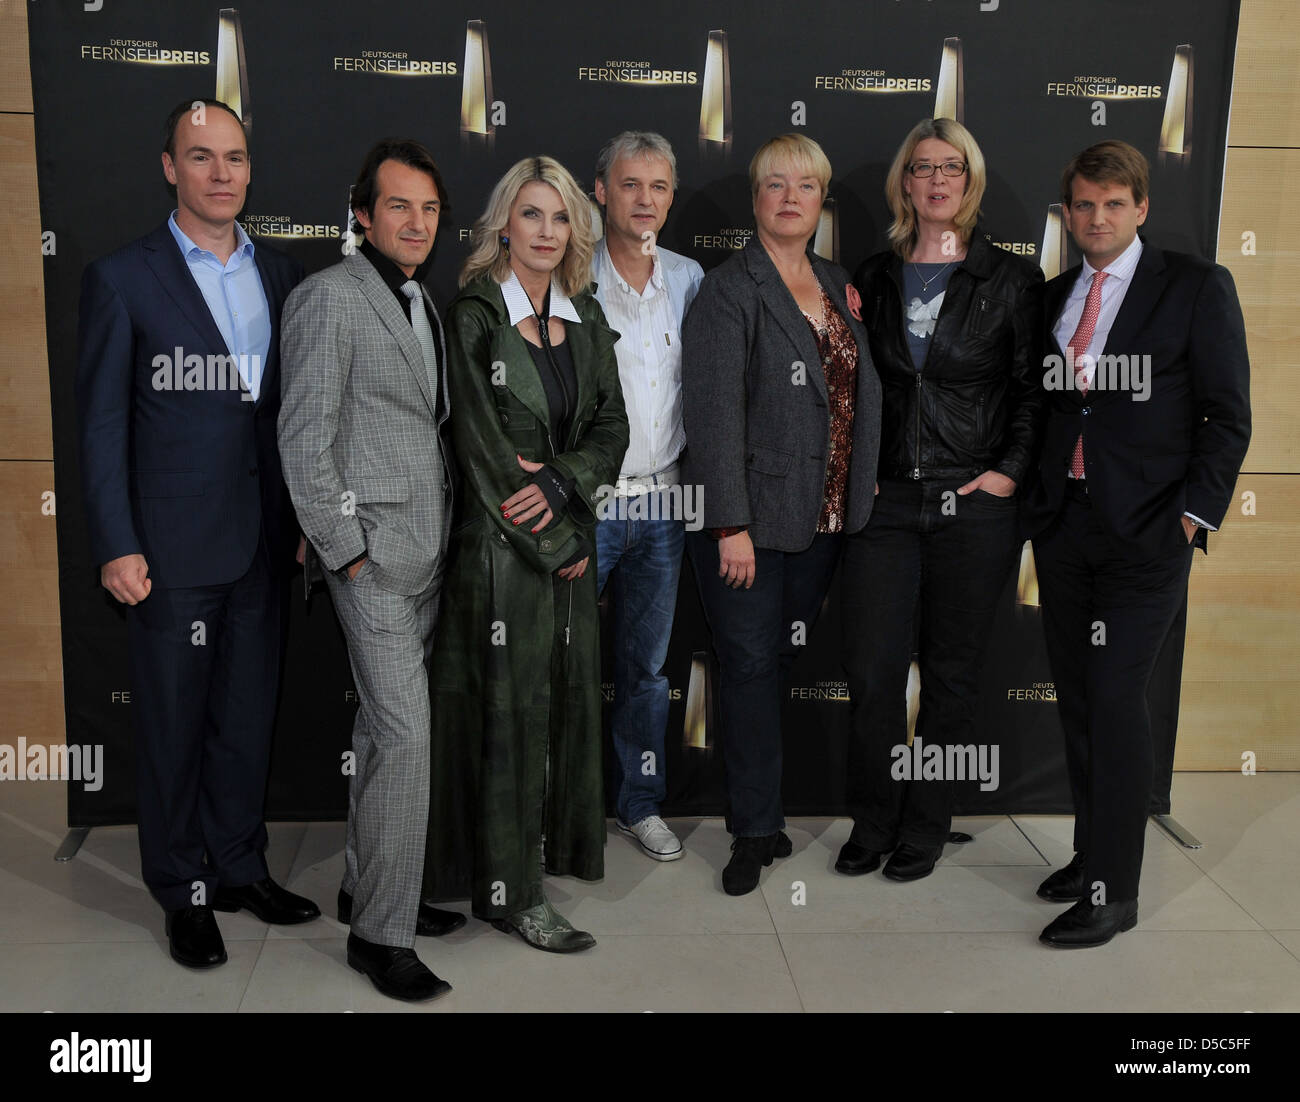 Jury members Christoph Keese, Hans-Werner Meyer, Else Buschheuer, Dieter Anchlag, Christiane Ruff, Leopold Hoesch and Klaudia Stock Photo